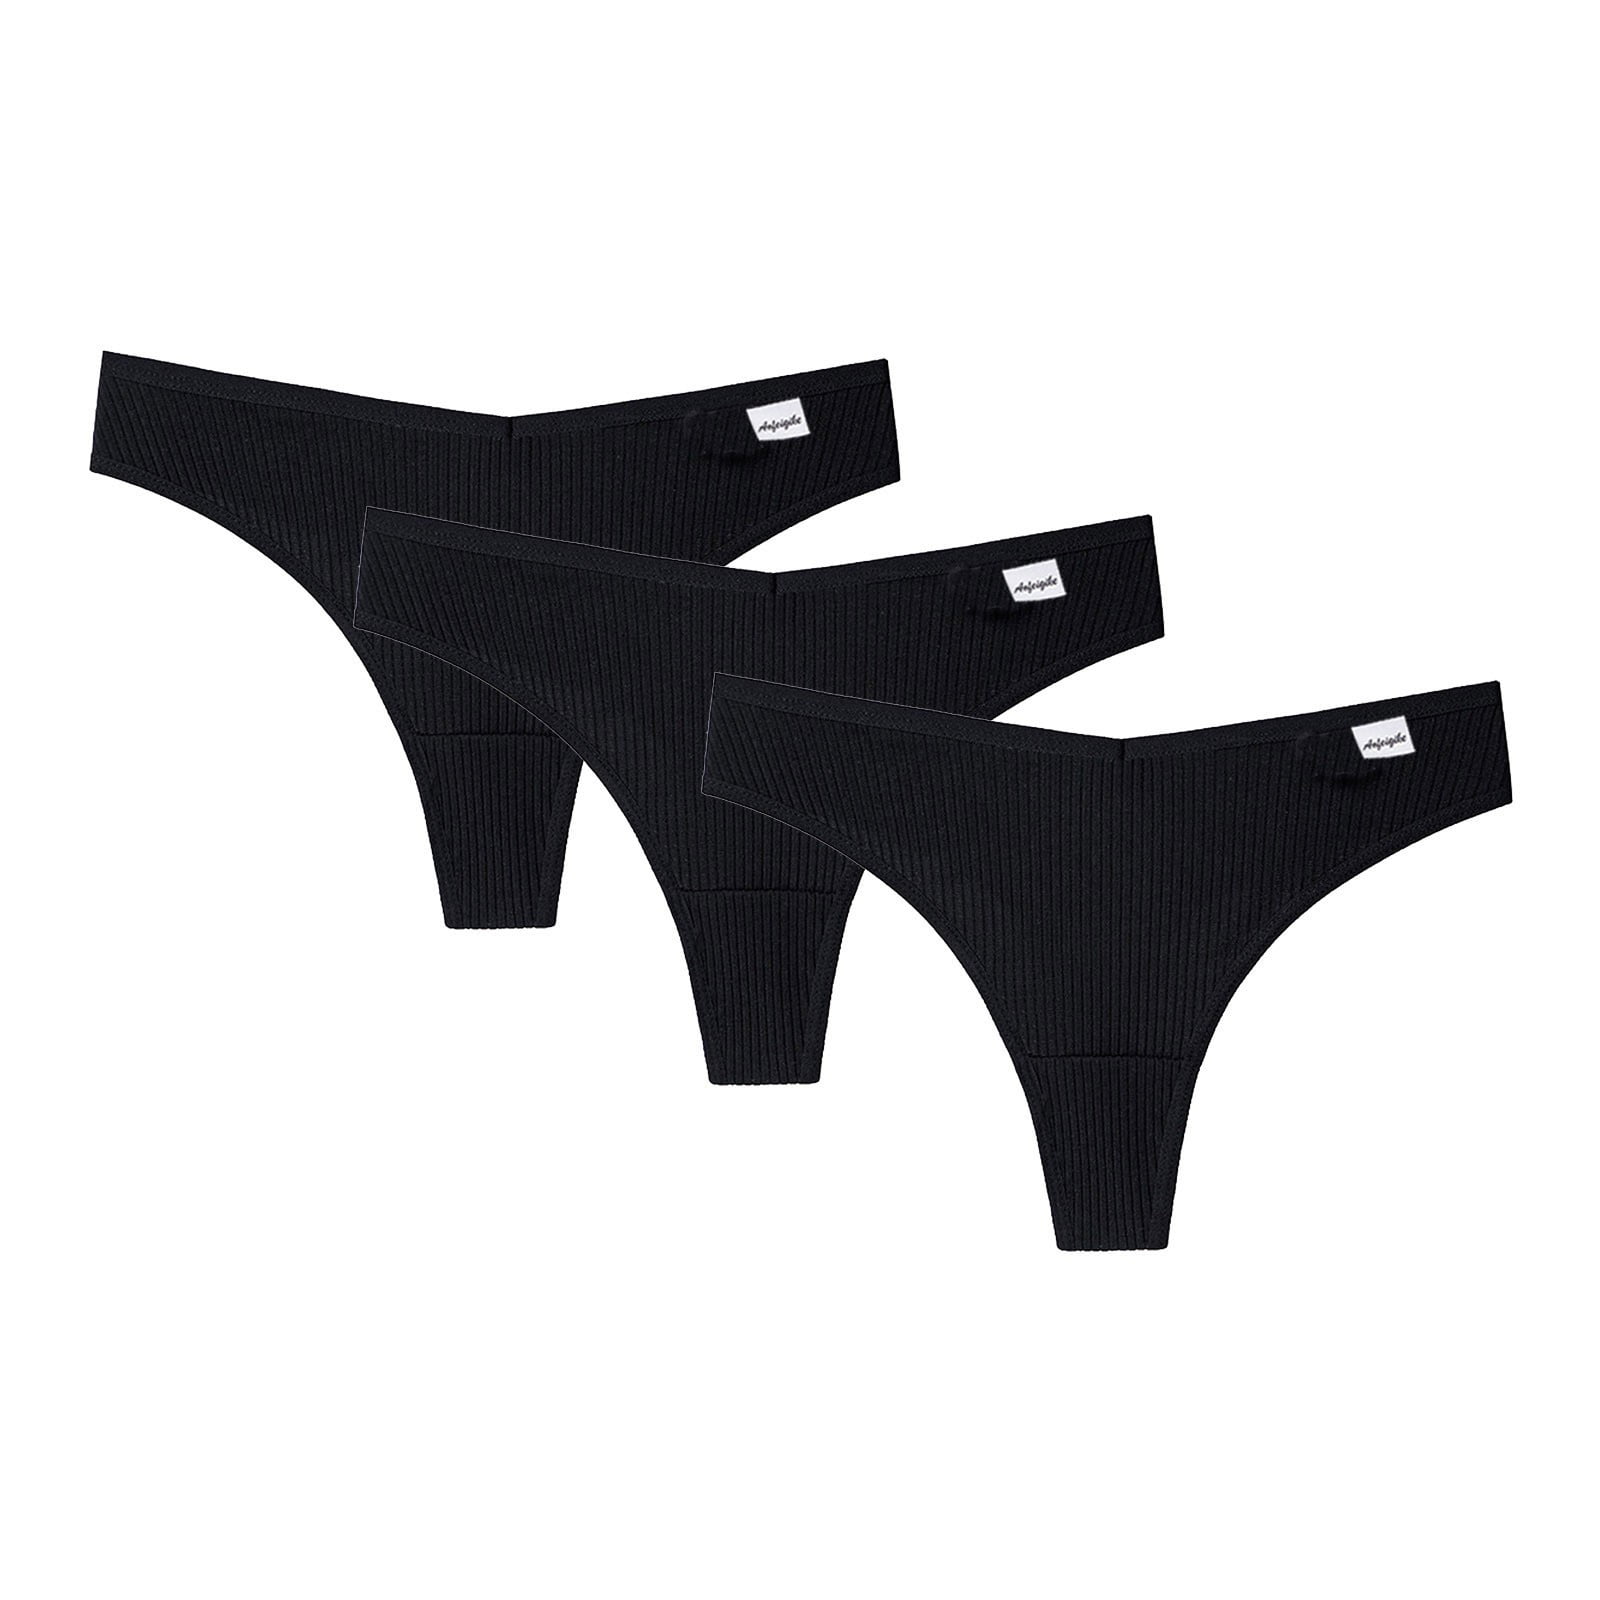 Kayannuo Cotton Underwear For Women Christmas Clearance 3PCS Women's Thong G -String Cotton Thongs Women's Panties Sexy V Waist Female Underpants Pantys  Lingerie Black 